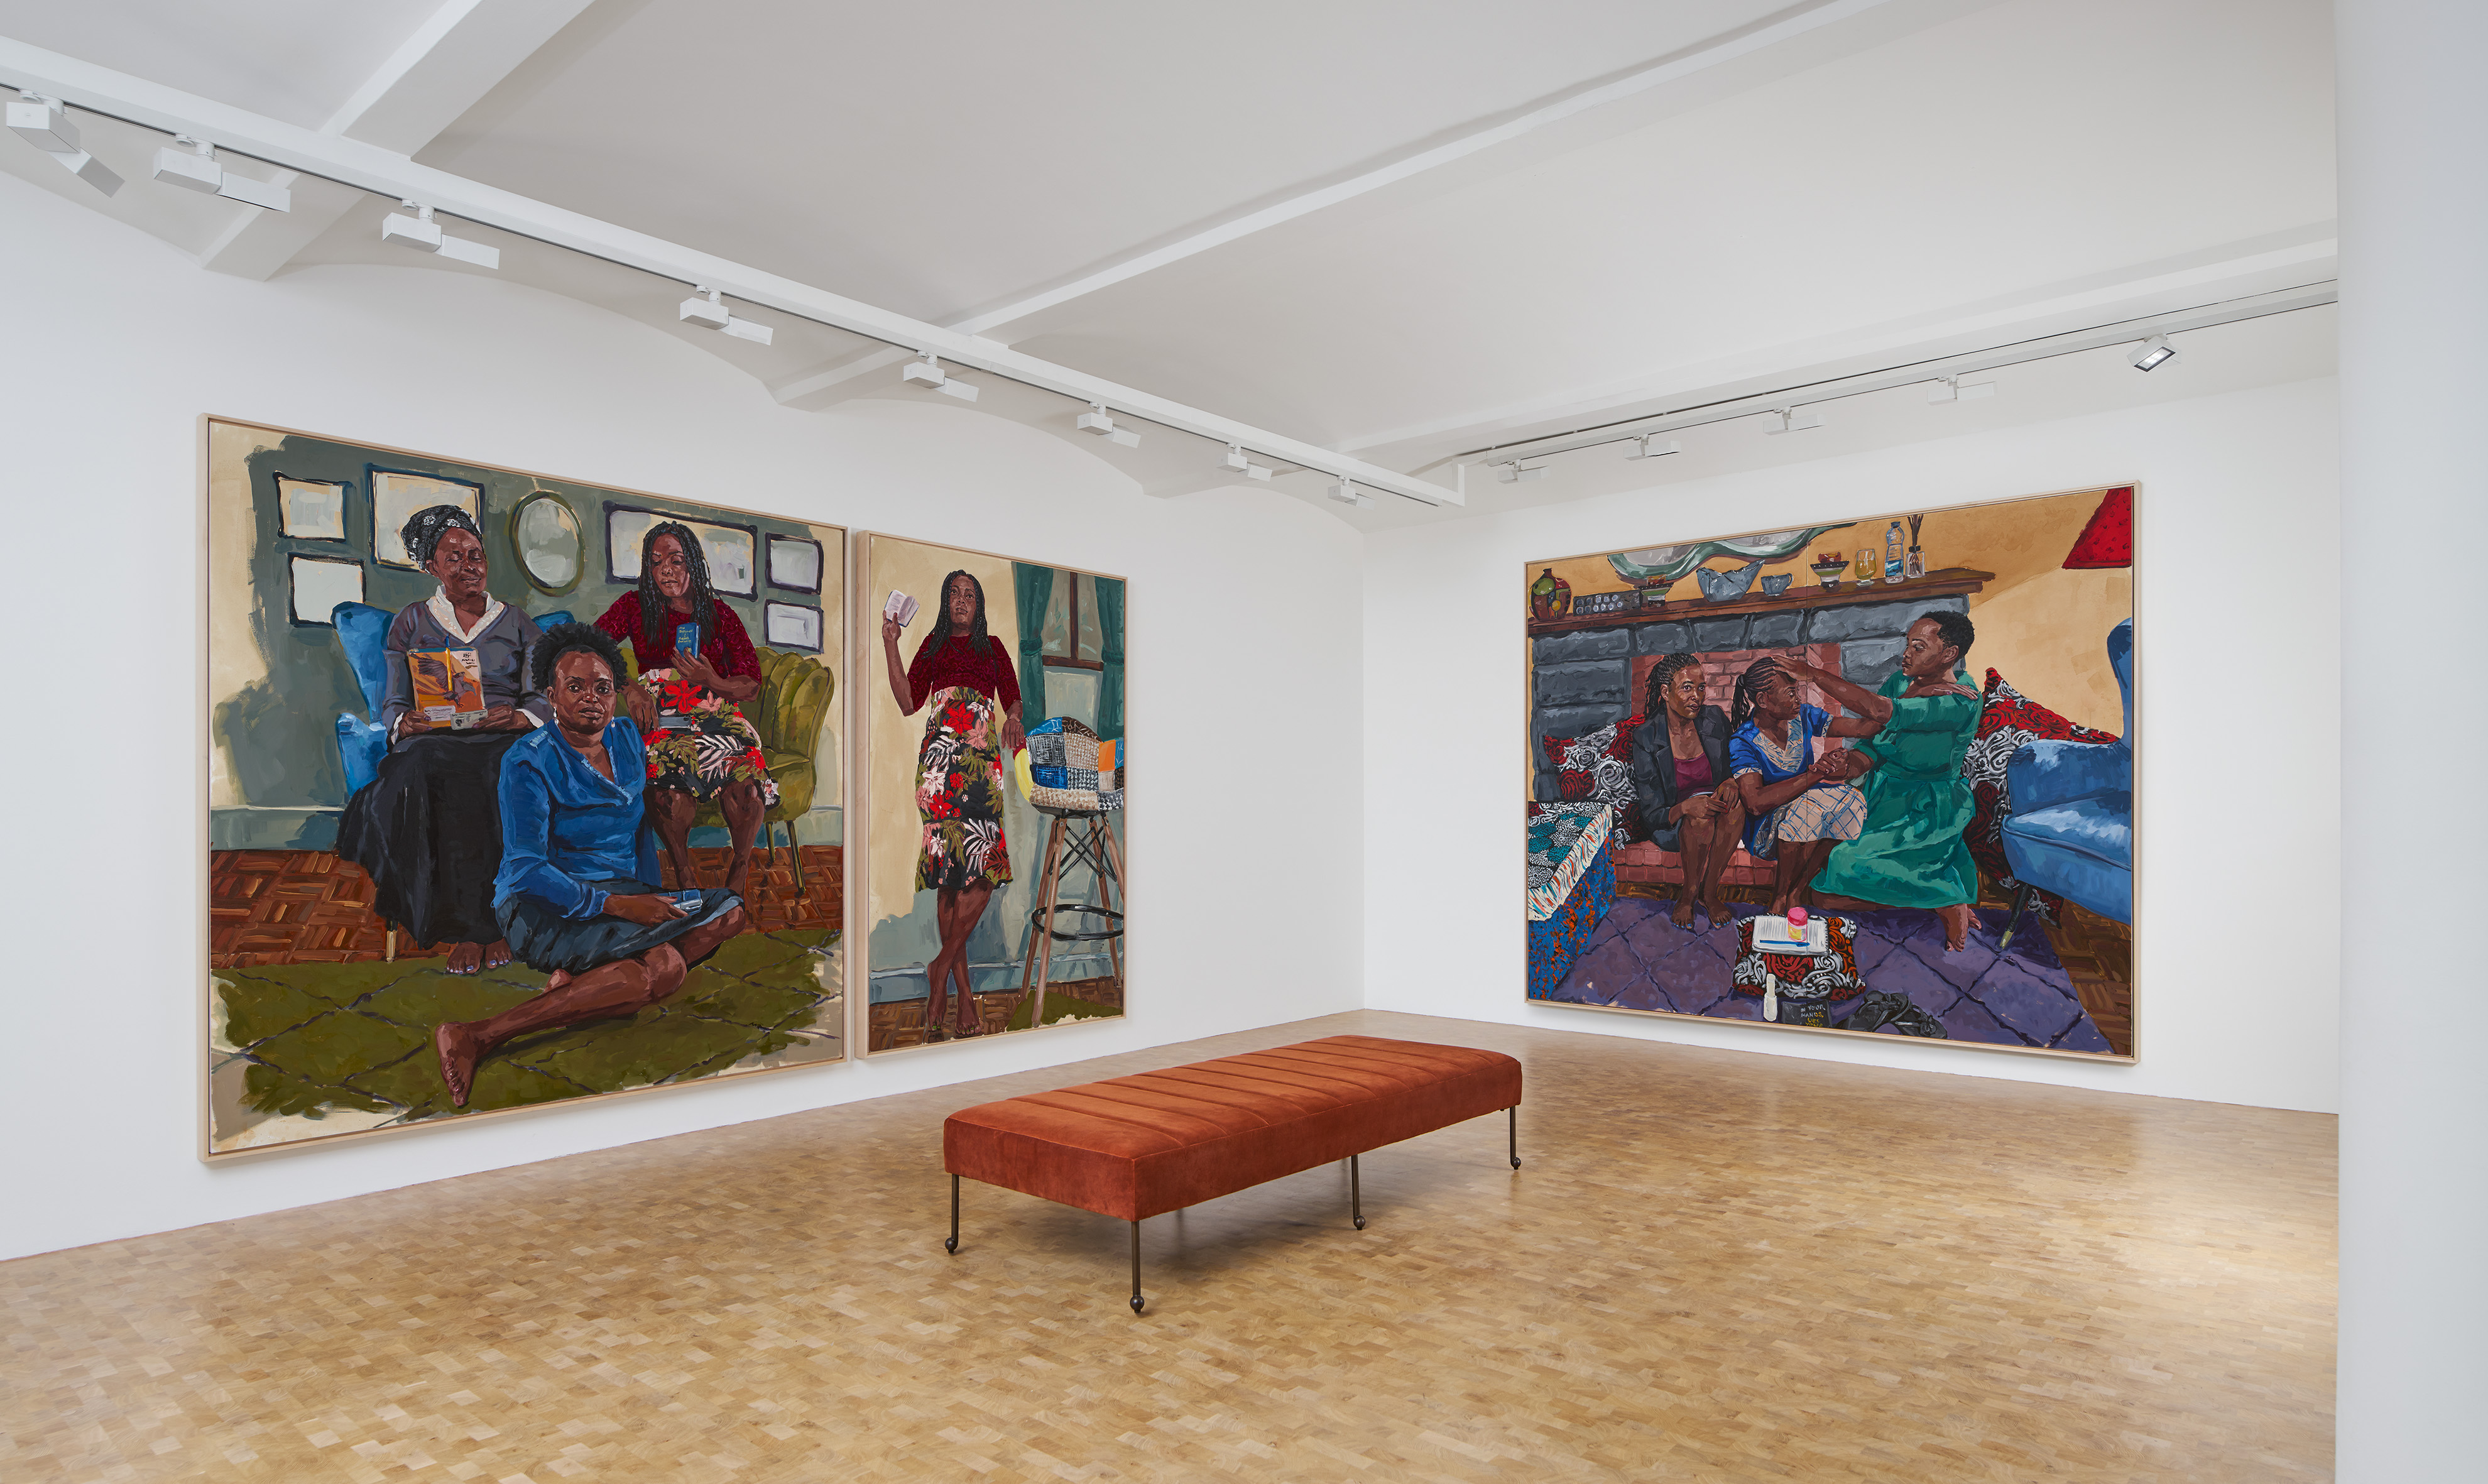 Installation image for Wangari Mathenge: A Day of Rest, at Pippy Houldsworth Gallery